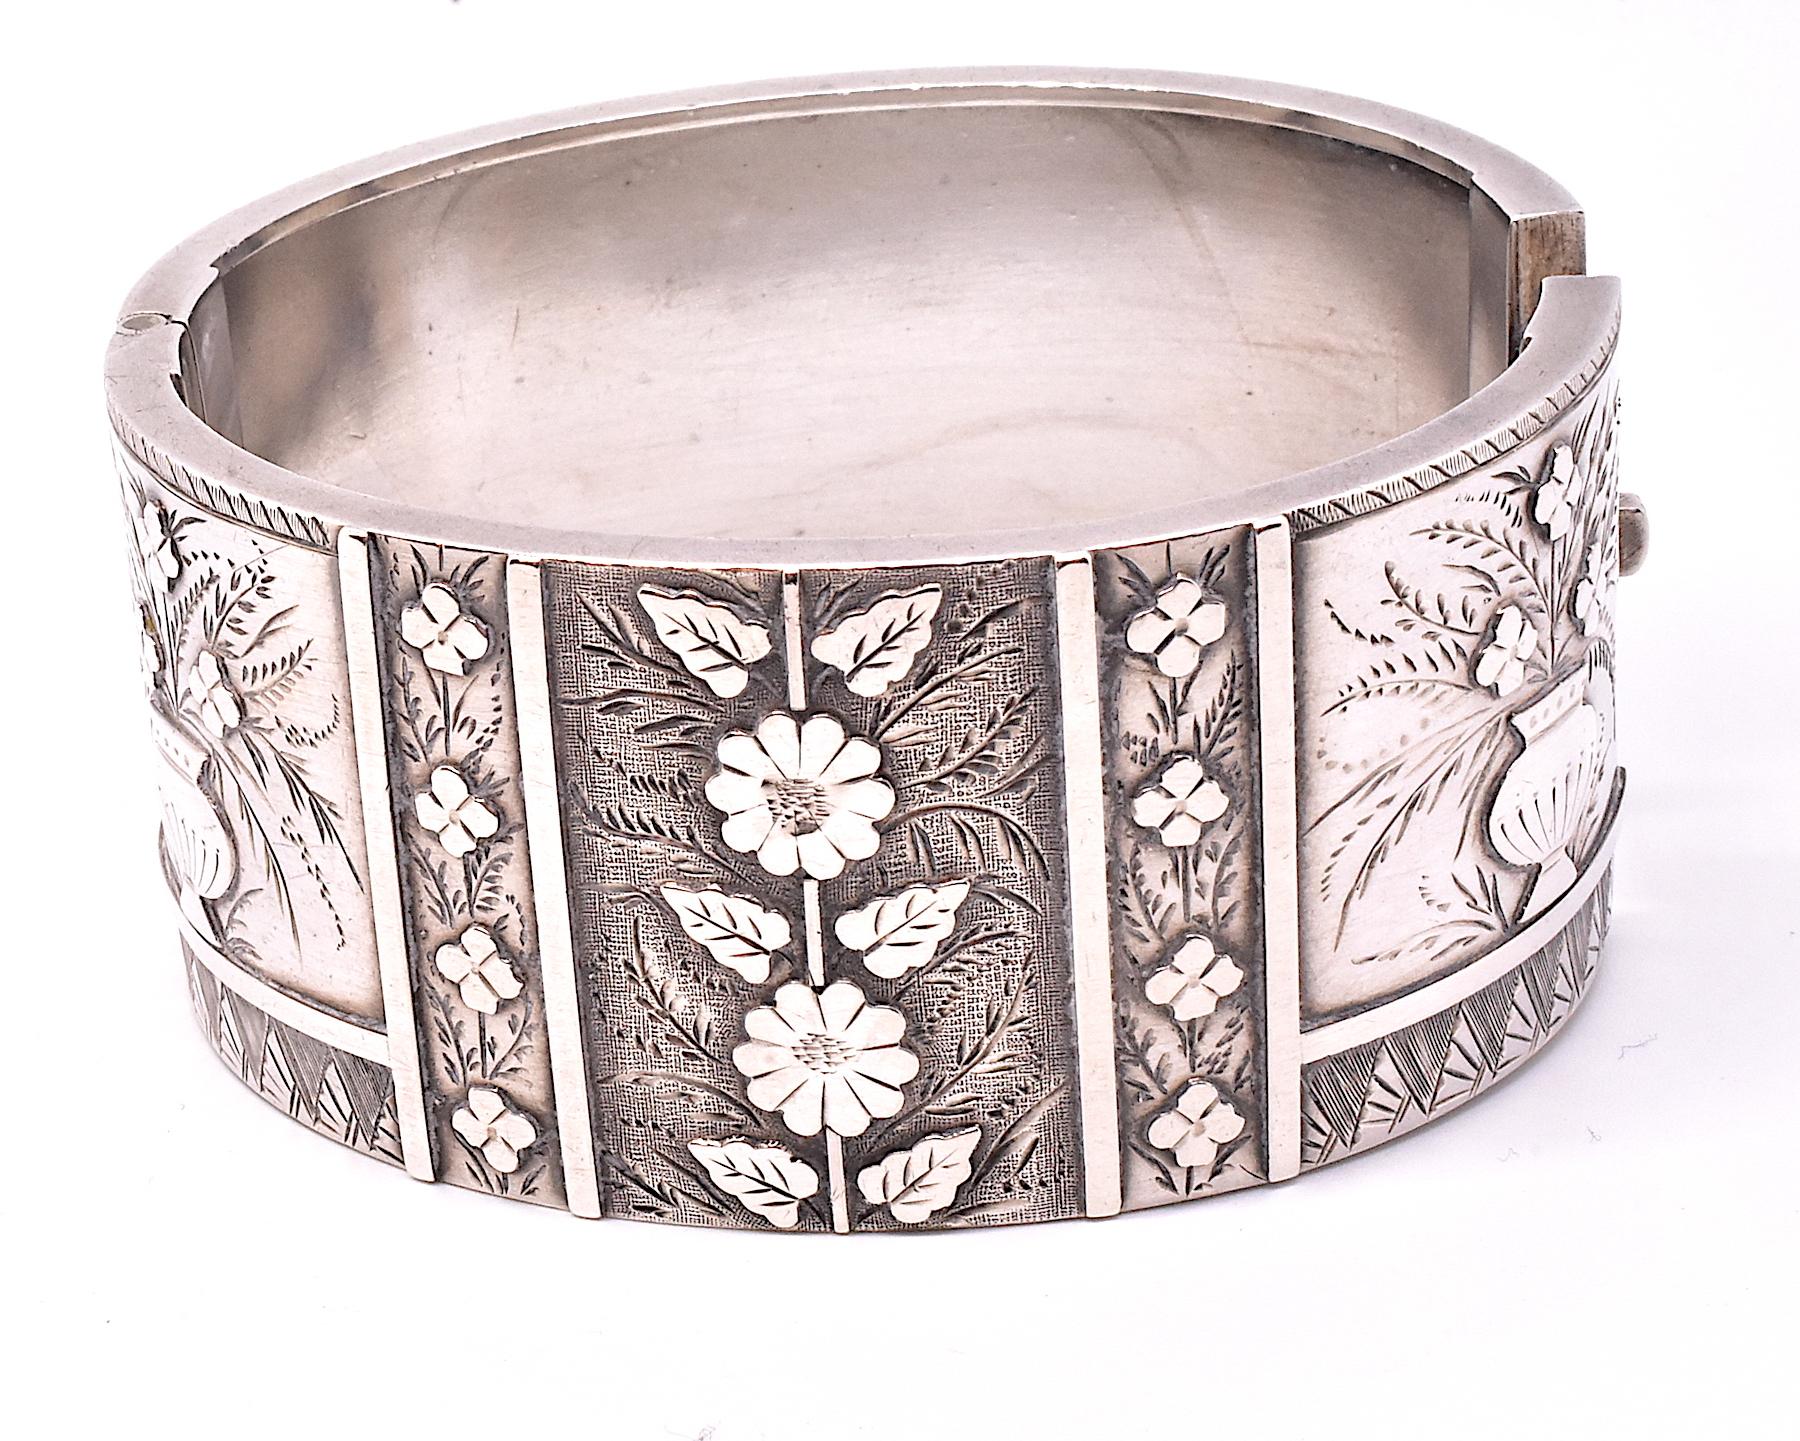 The symbolism and motifs behind the Victorian bangle bracelets, with their quaint floral bouquets and plants and trails of leaves well known. Our Sterling silver bangle has two carved stylized vases of flowers on either side, a vertical array of